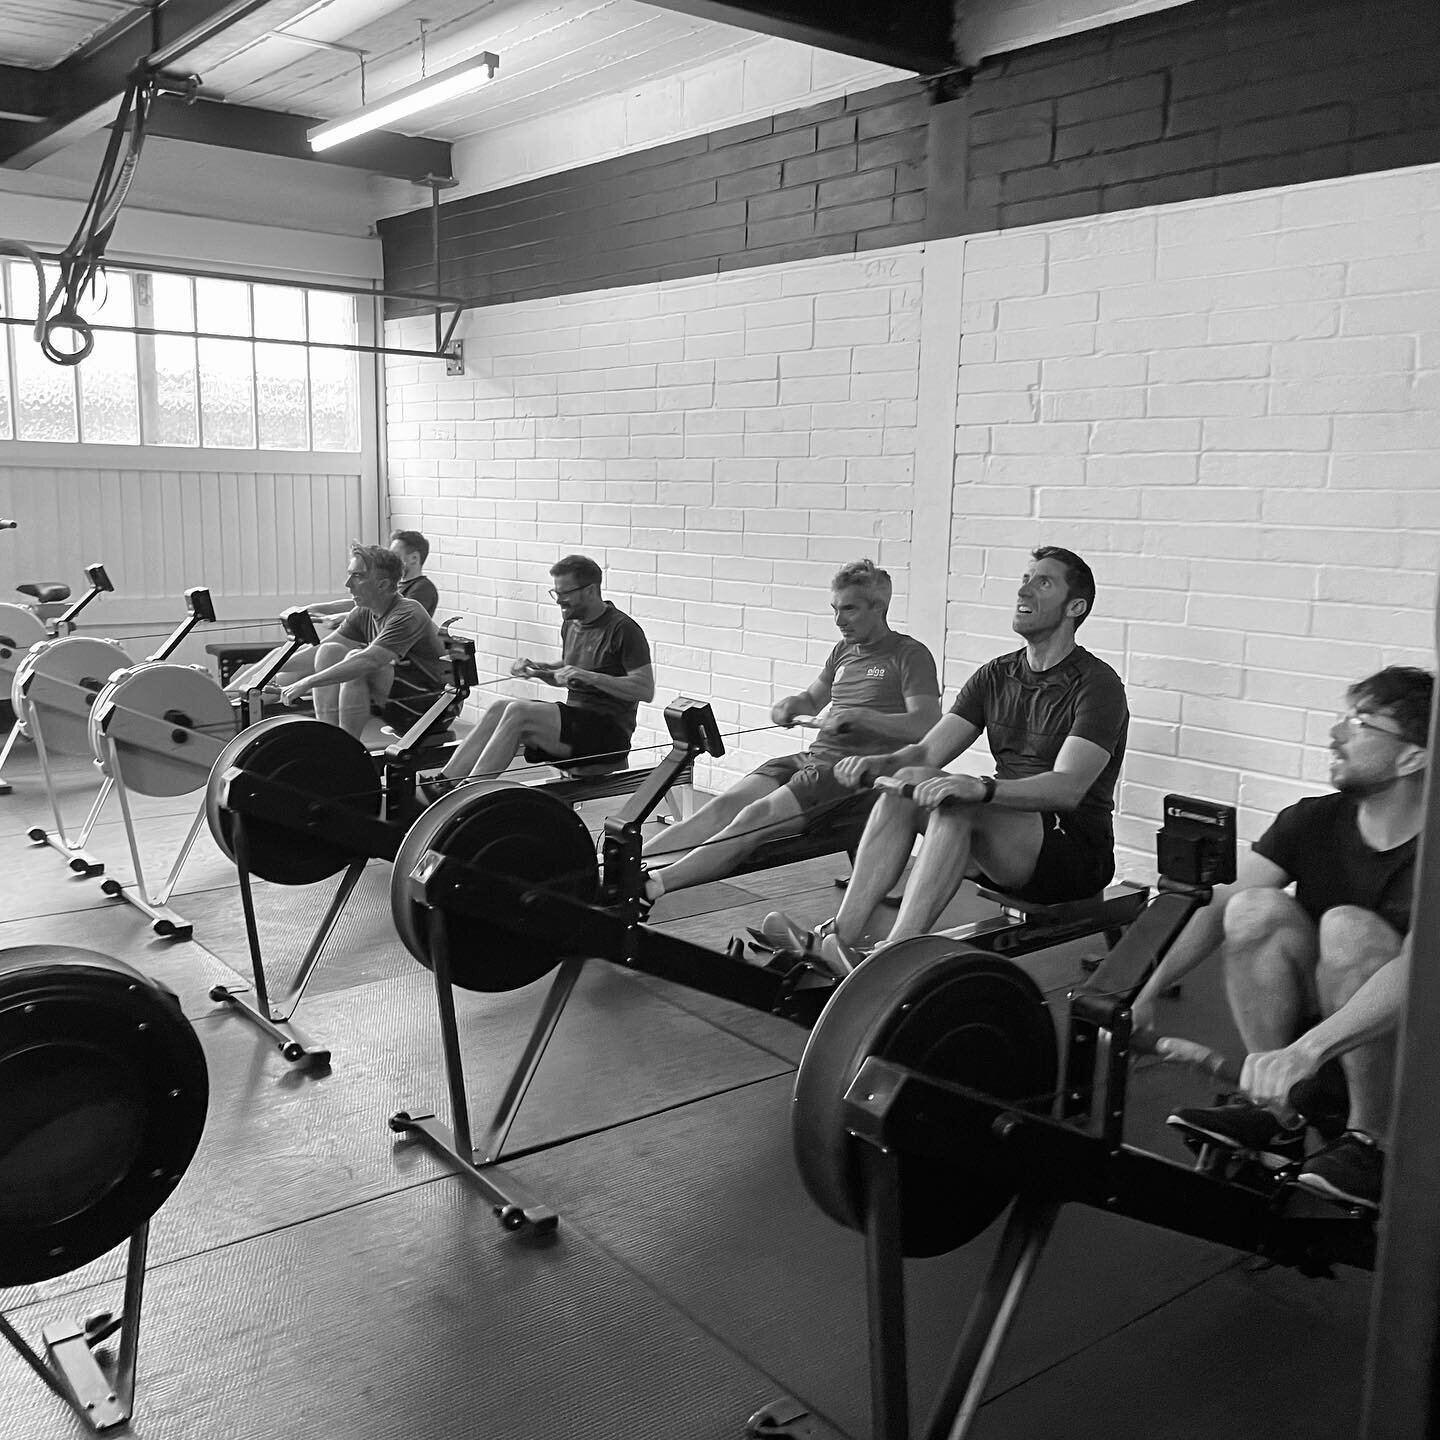 The many faces of rowing  #row #rowing #concept2 #crossfit #crossfituk #workout